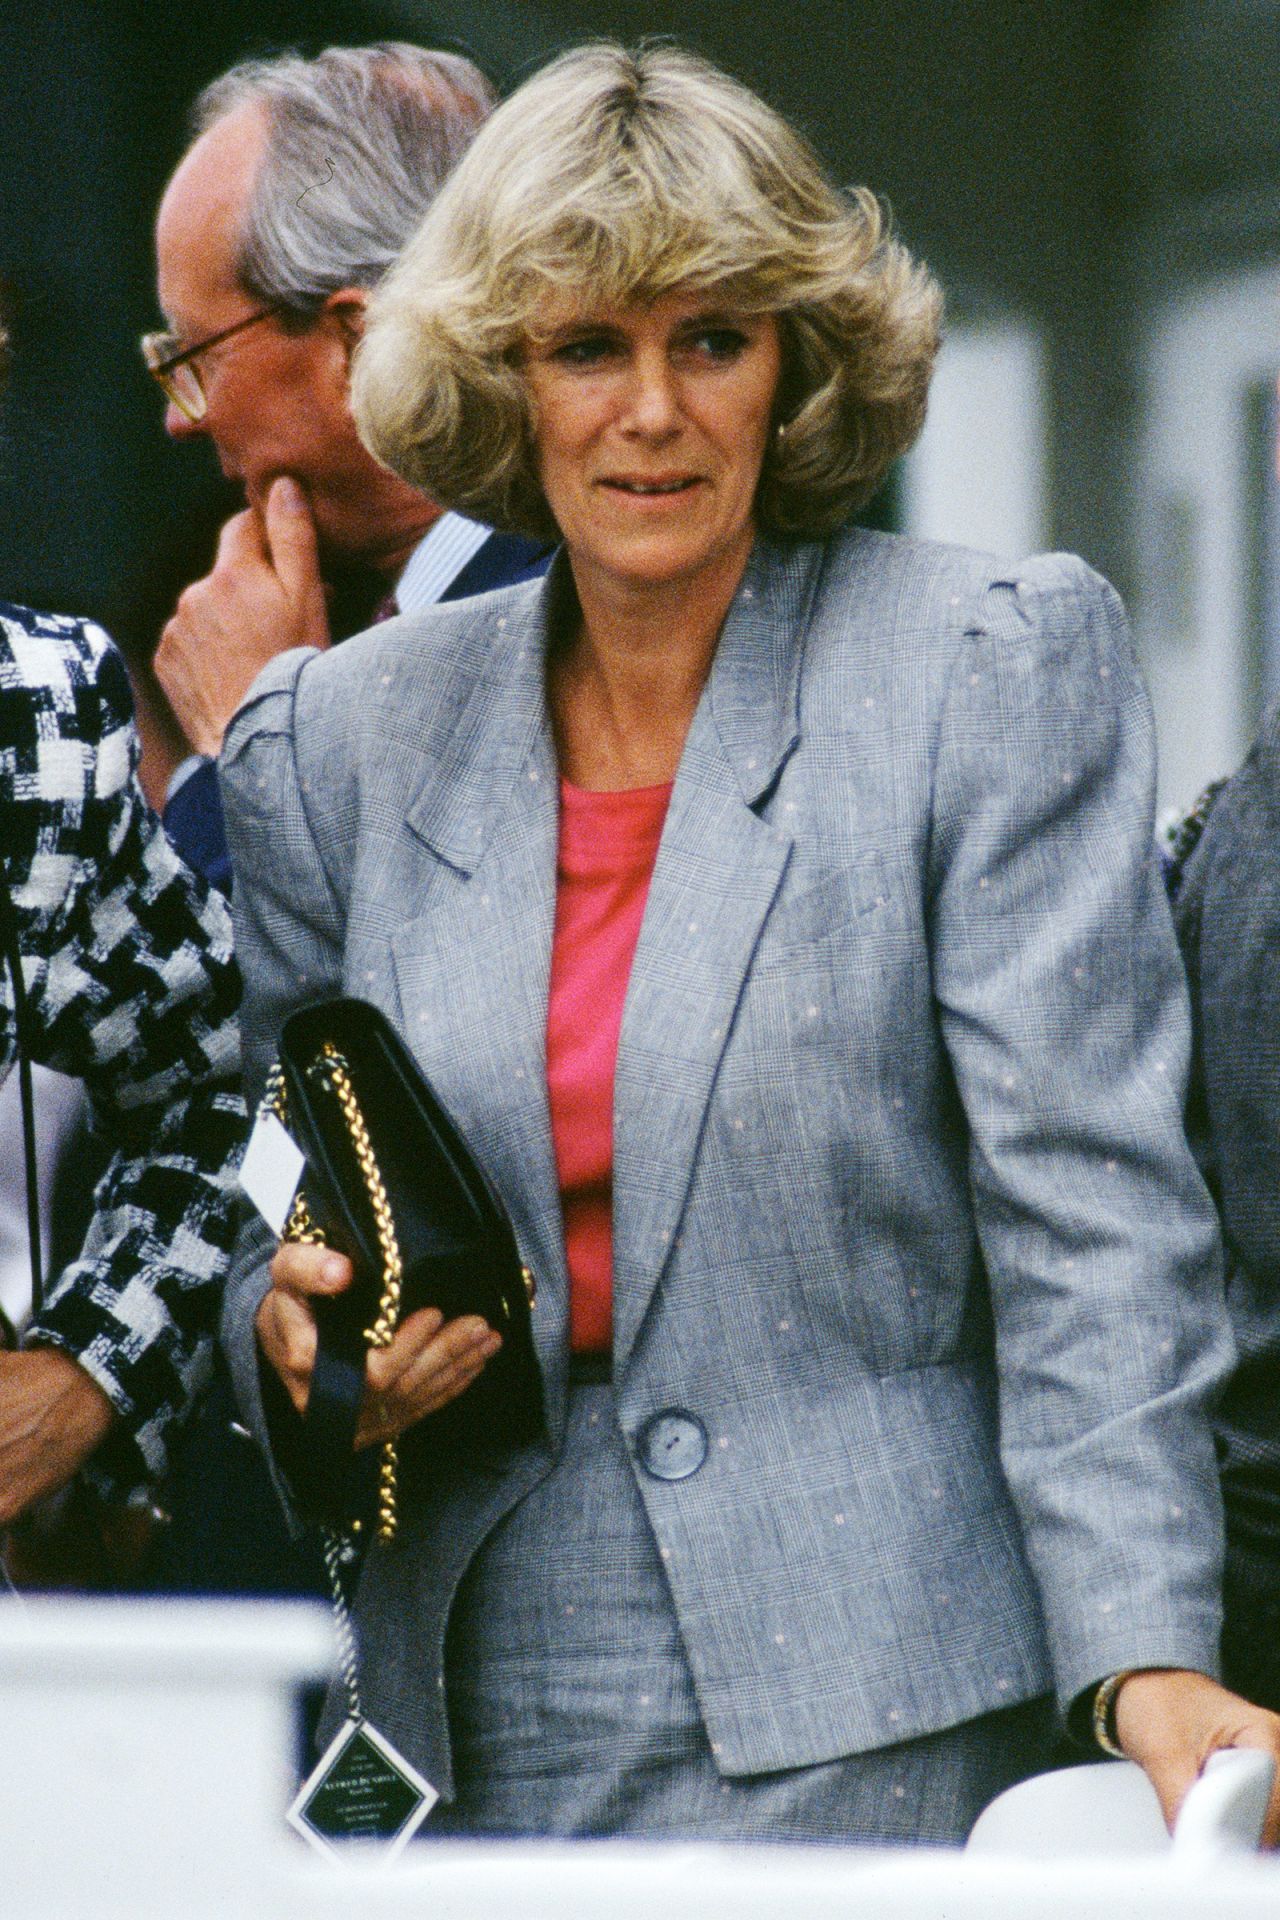 During the '80s and '90s, matching skirt suits — complete with powerful shoulder padding — were a mainstay in Camilla's wardrobe. In 1992, while attending a polo match at Smith's Lawn in Windsor, Camilla opted for a gray and fuchsia combination.